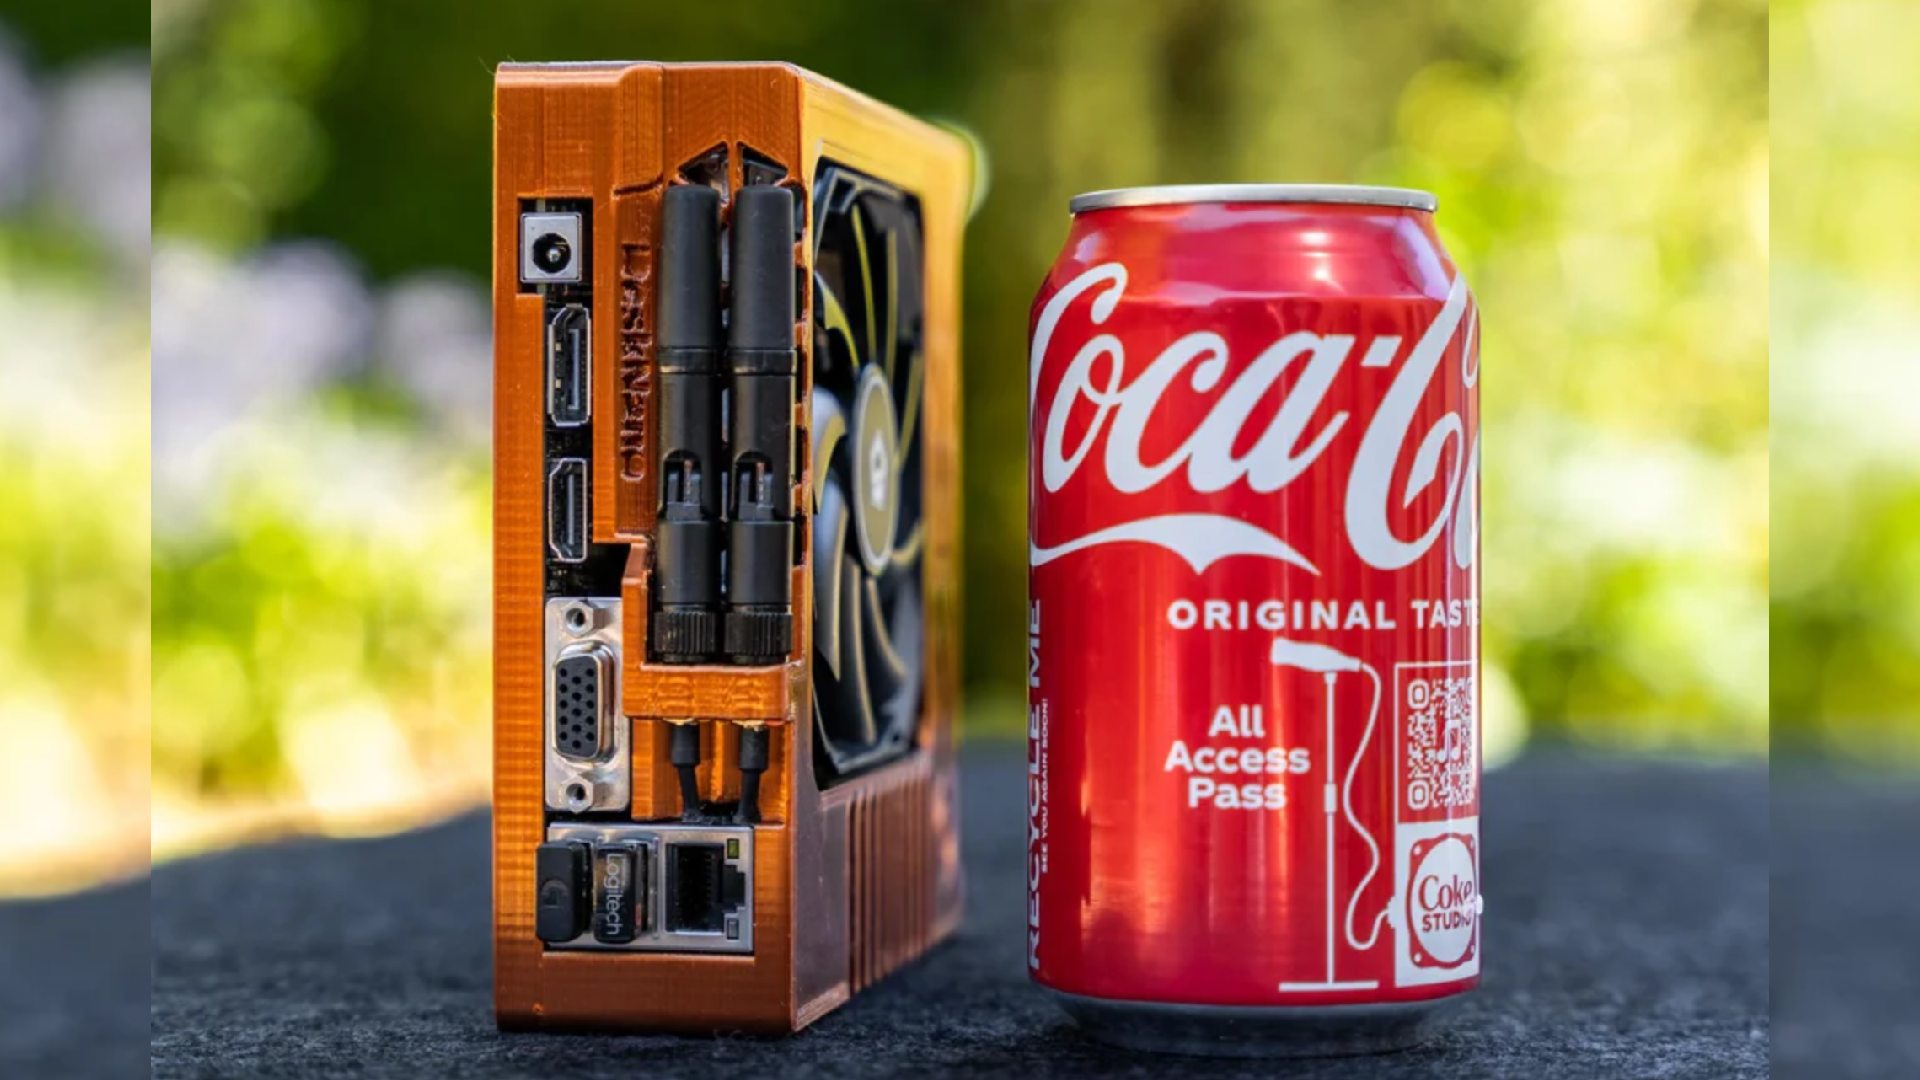 Tiny gaming PC with orange casing next to Coke can in garden